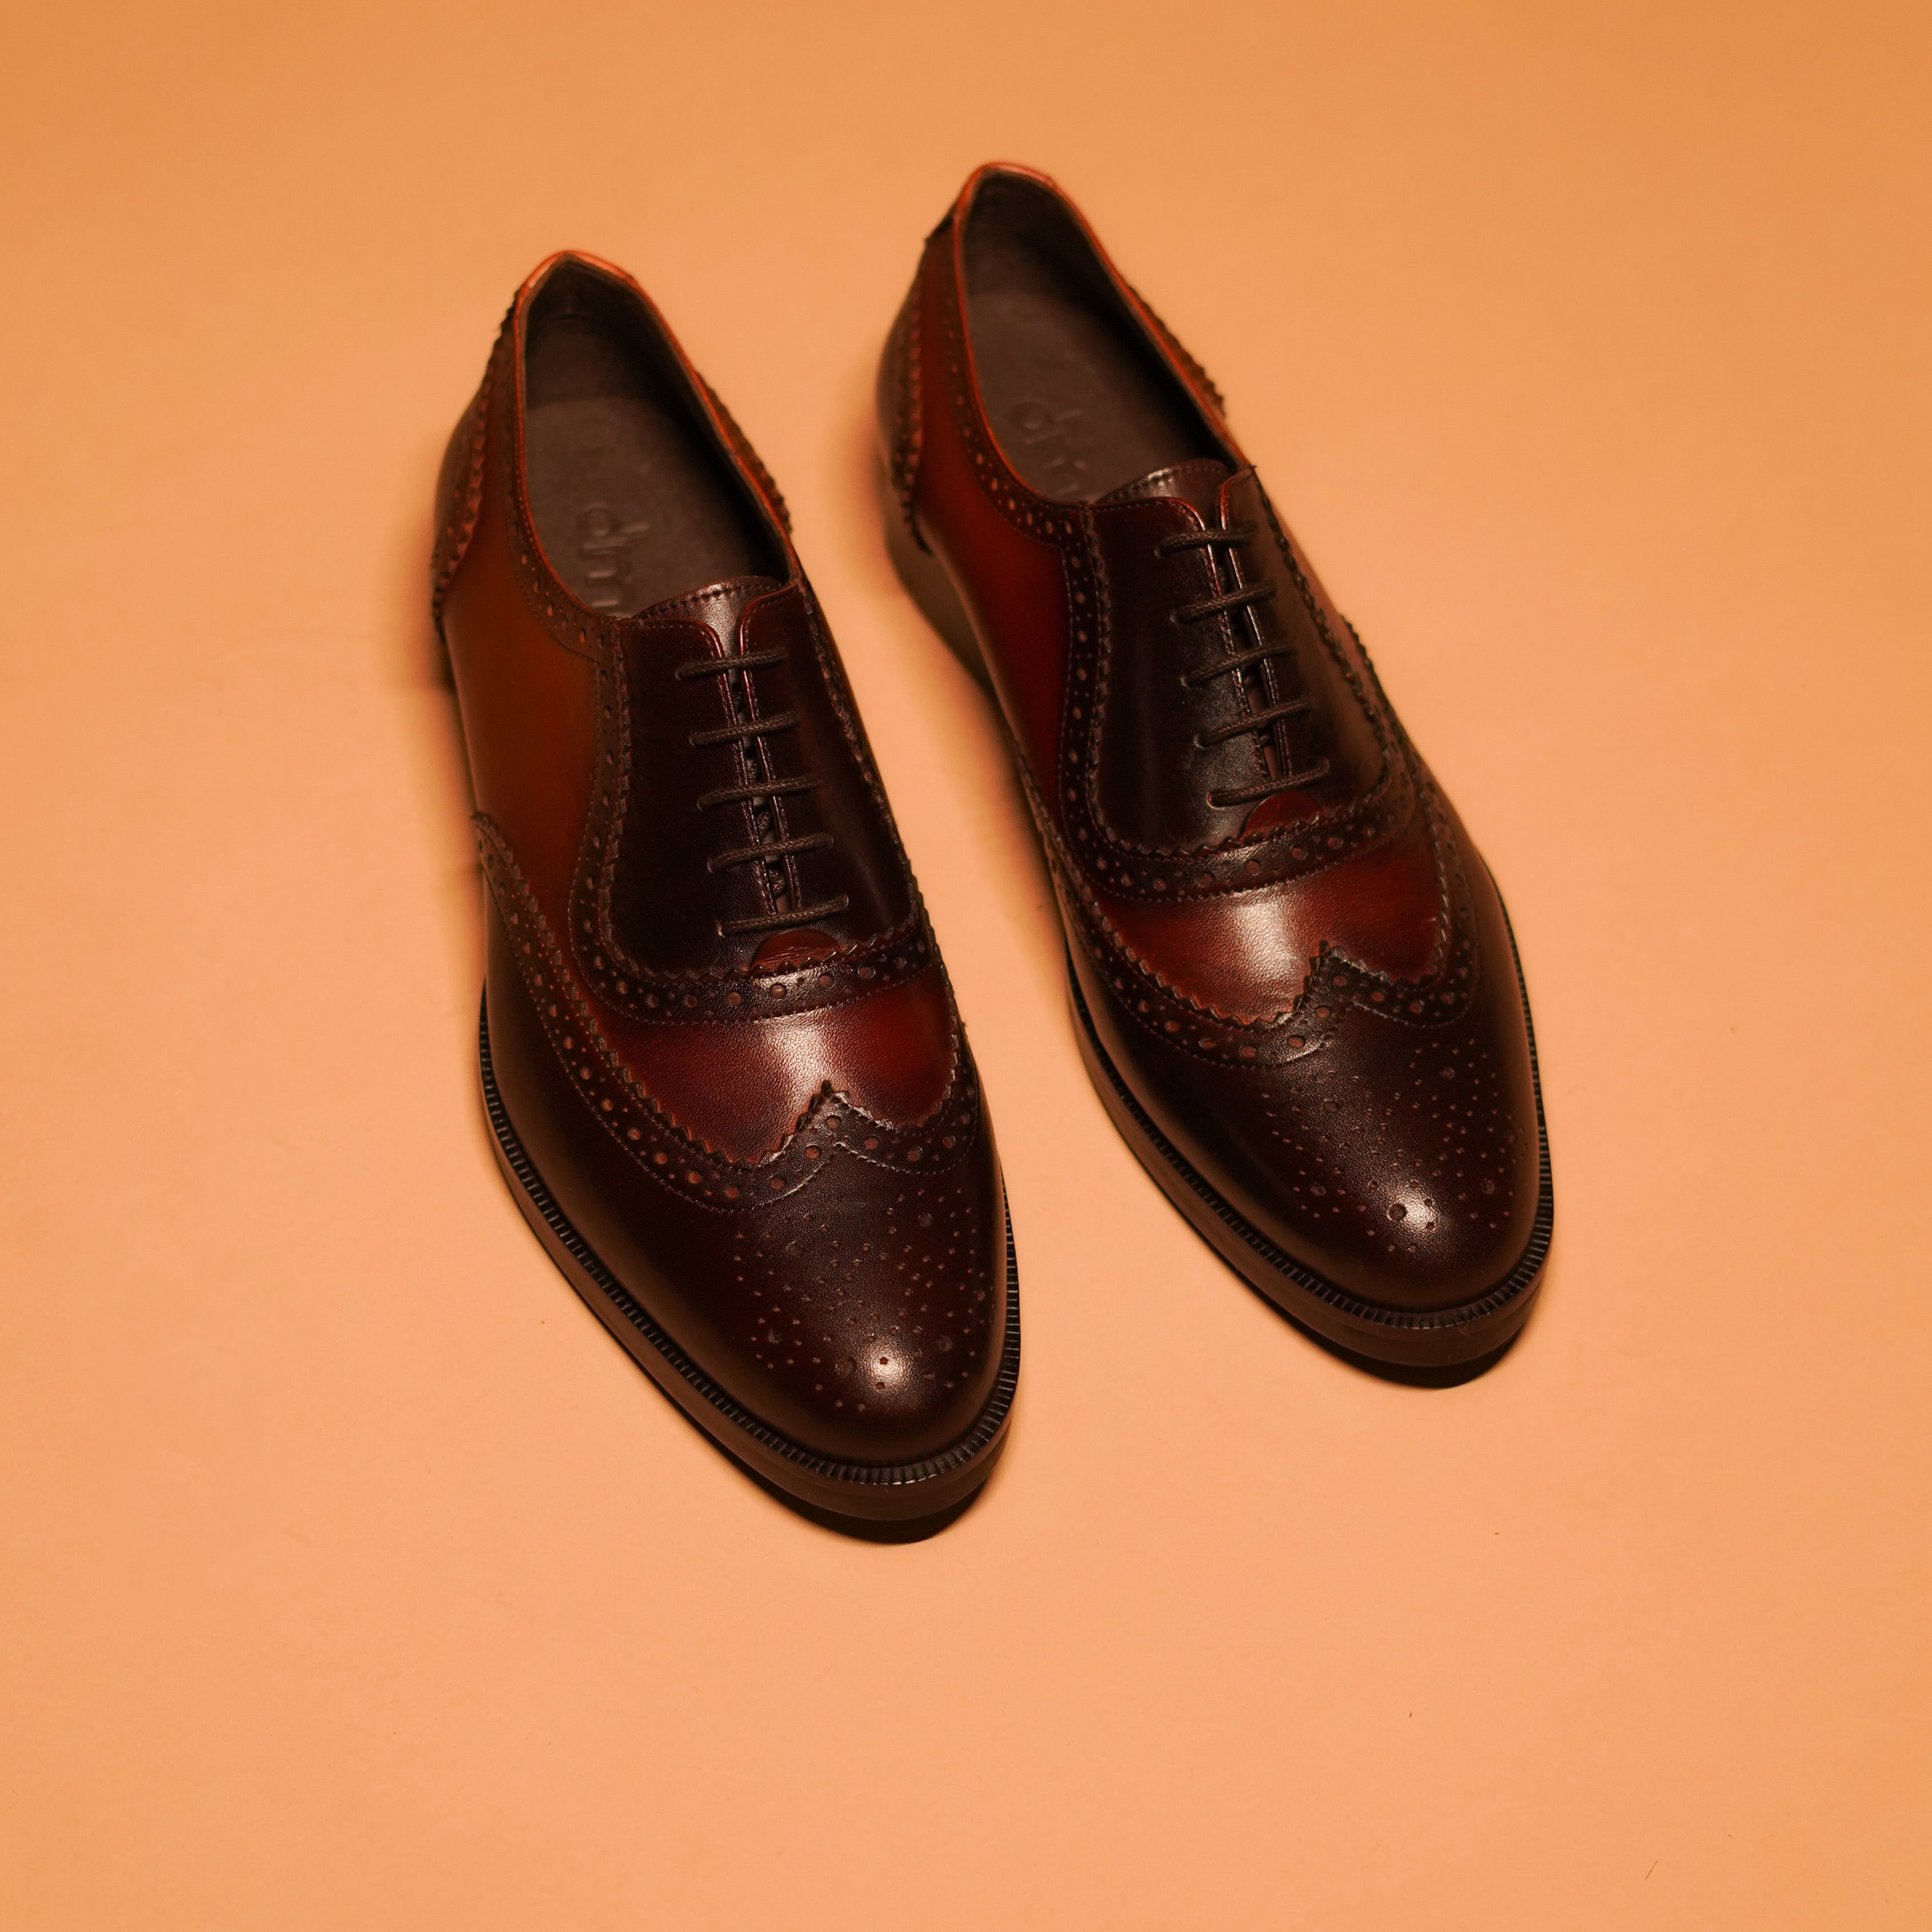 Detailed view of Classico Bruno's exquisite dual-tone leather finish and Italian toe shape craftsmanship.